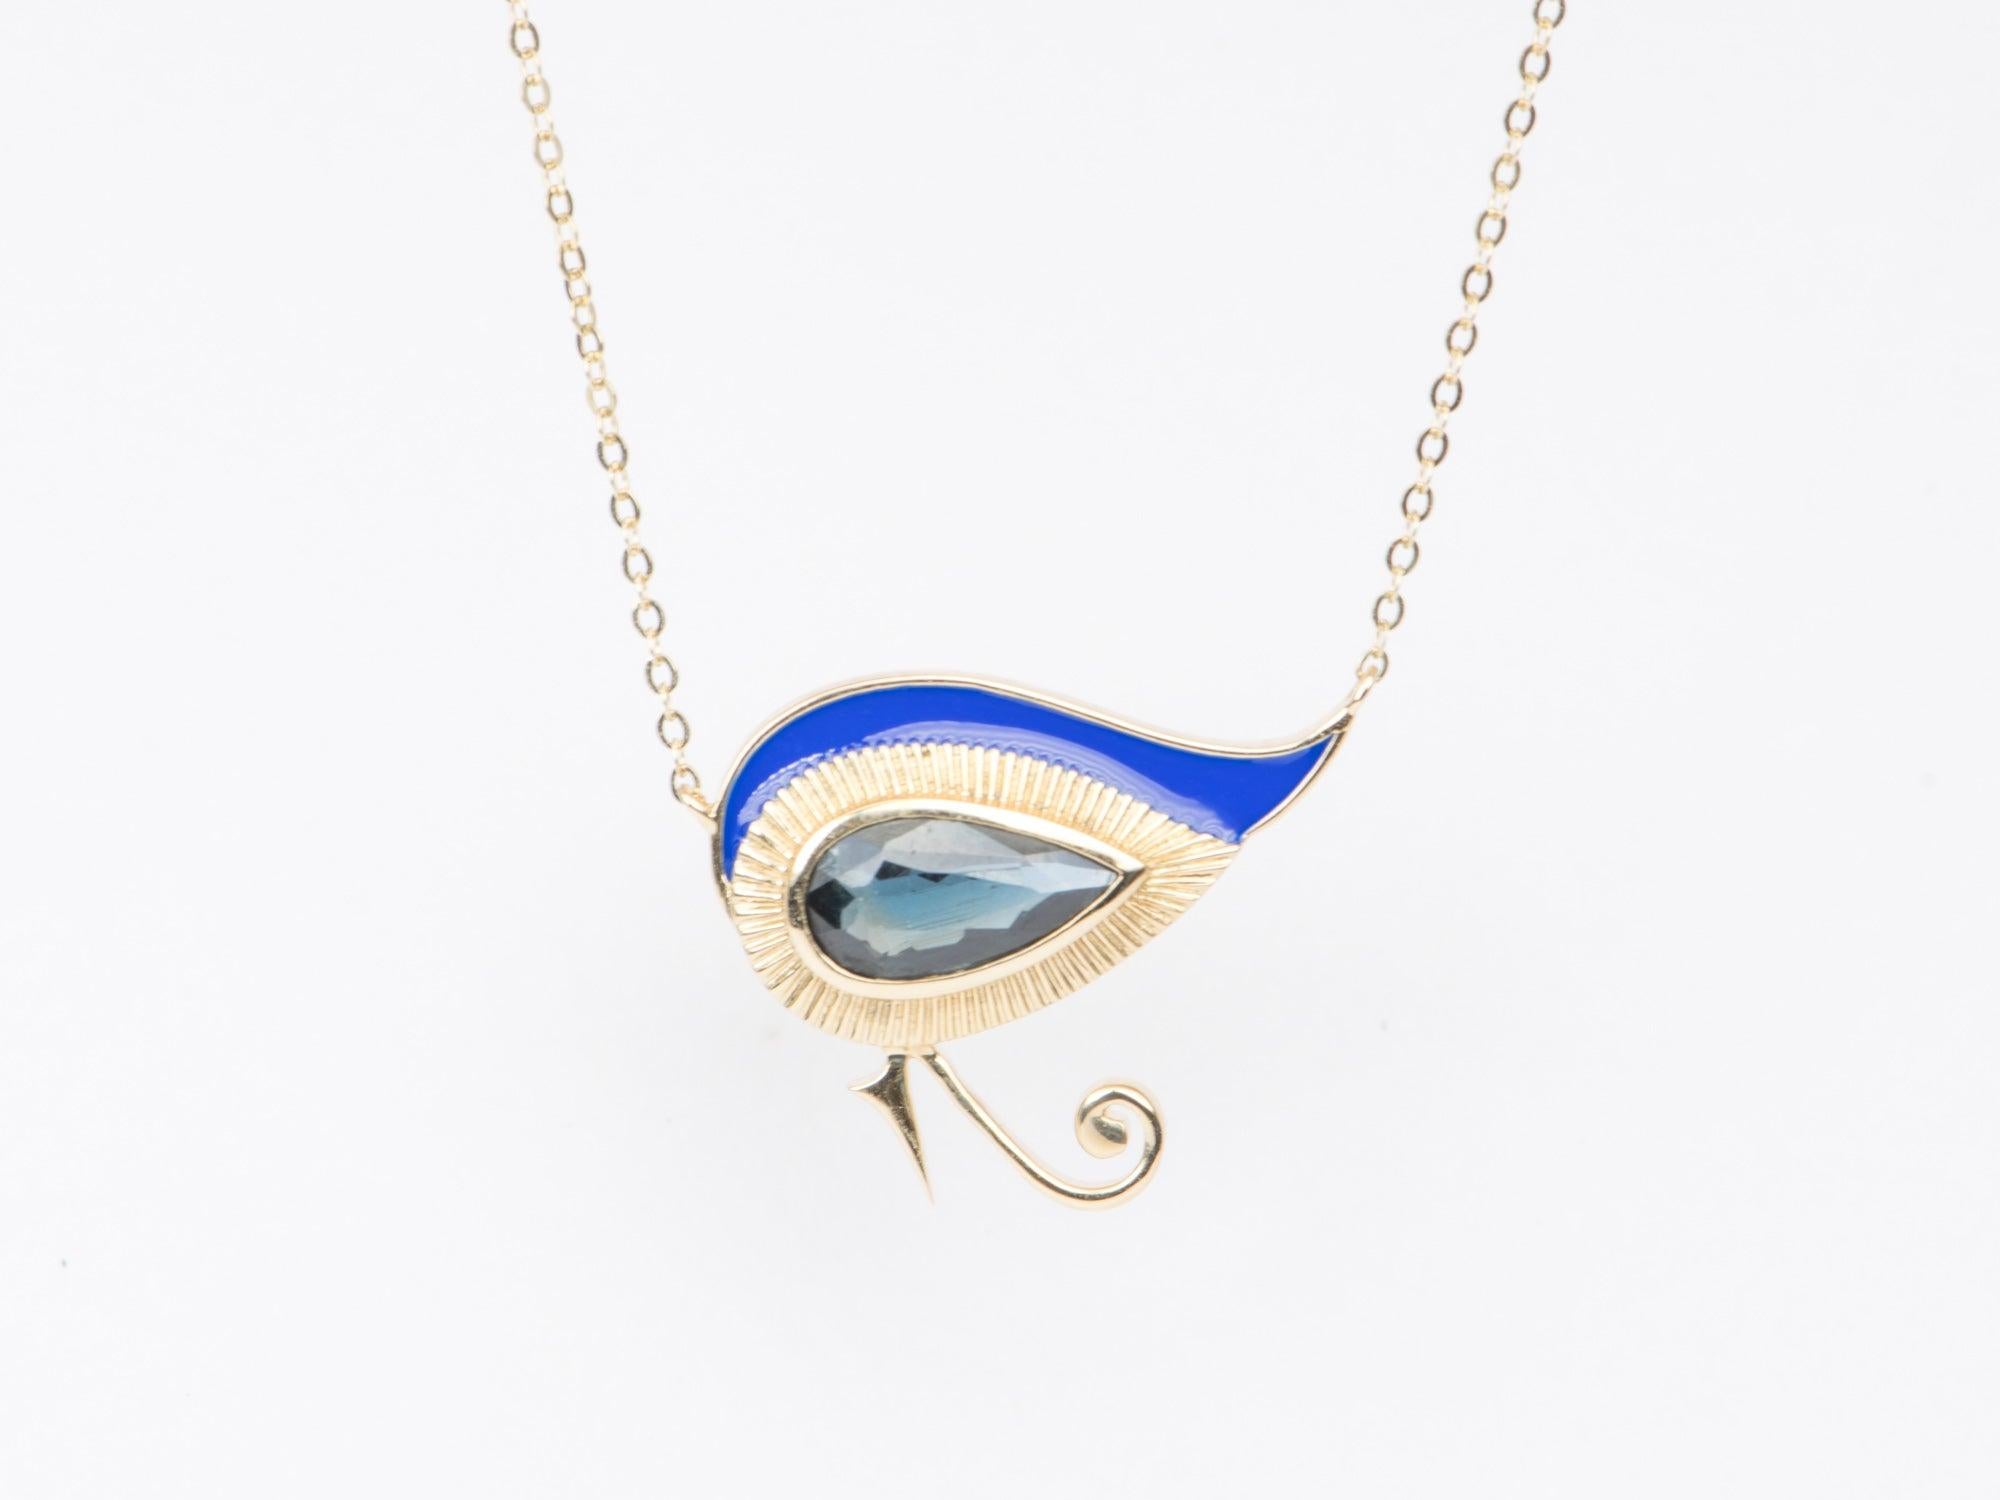 Pear Cut Eye of Horus 1.82 Ct Nigerian Sapphire with Blue Enamel 9k Gold Necklace R4262 For Sale